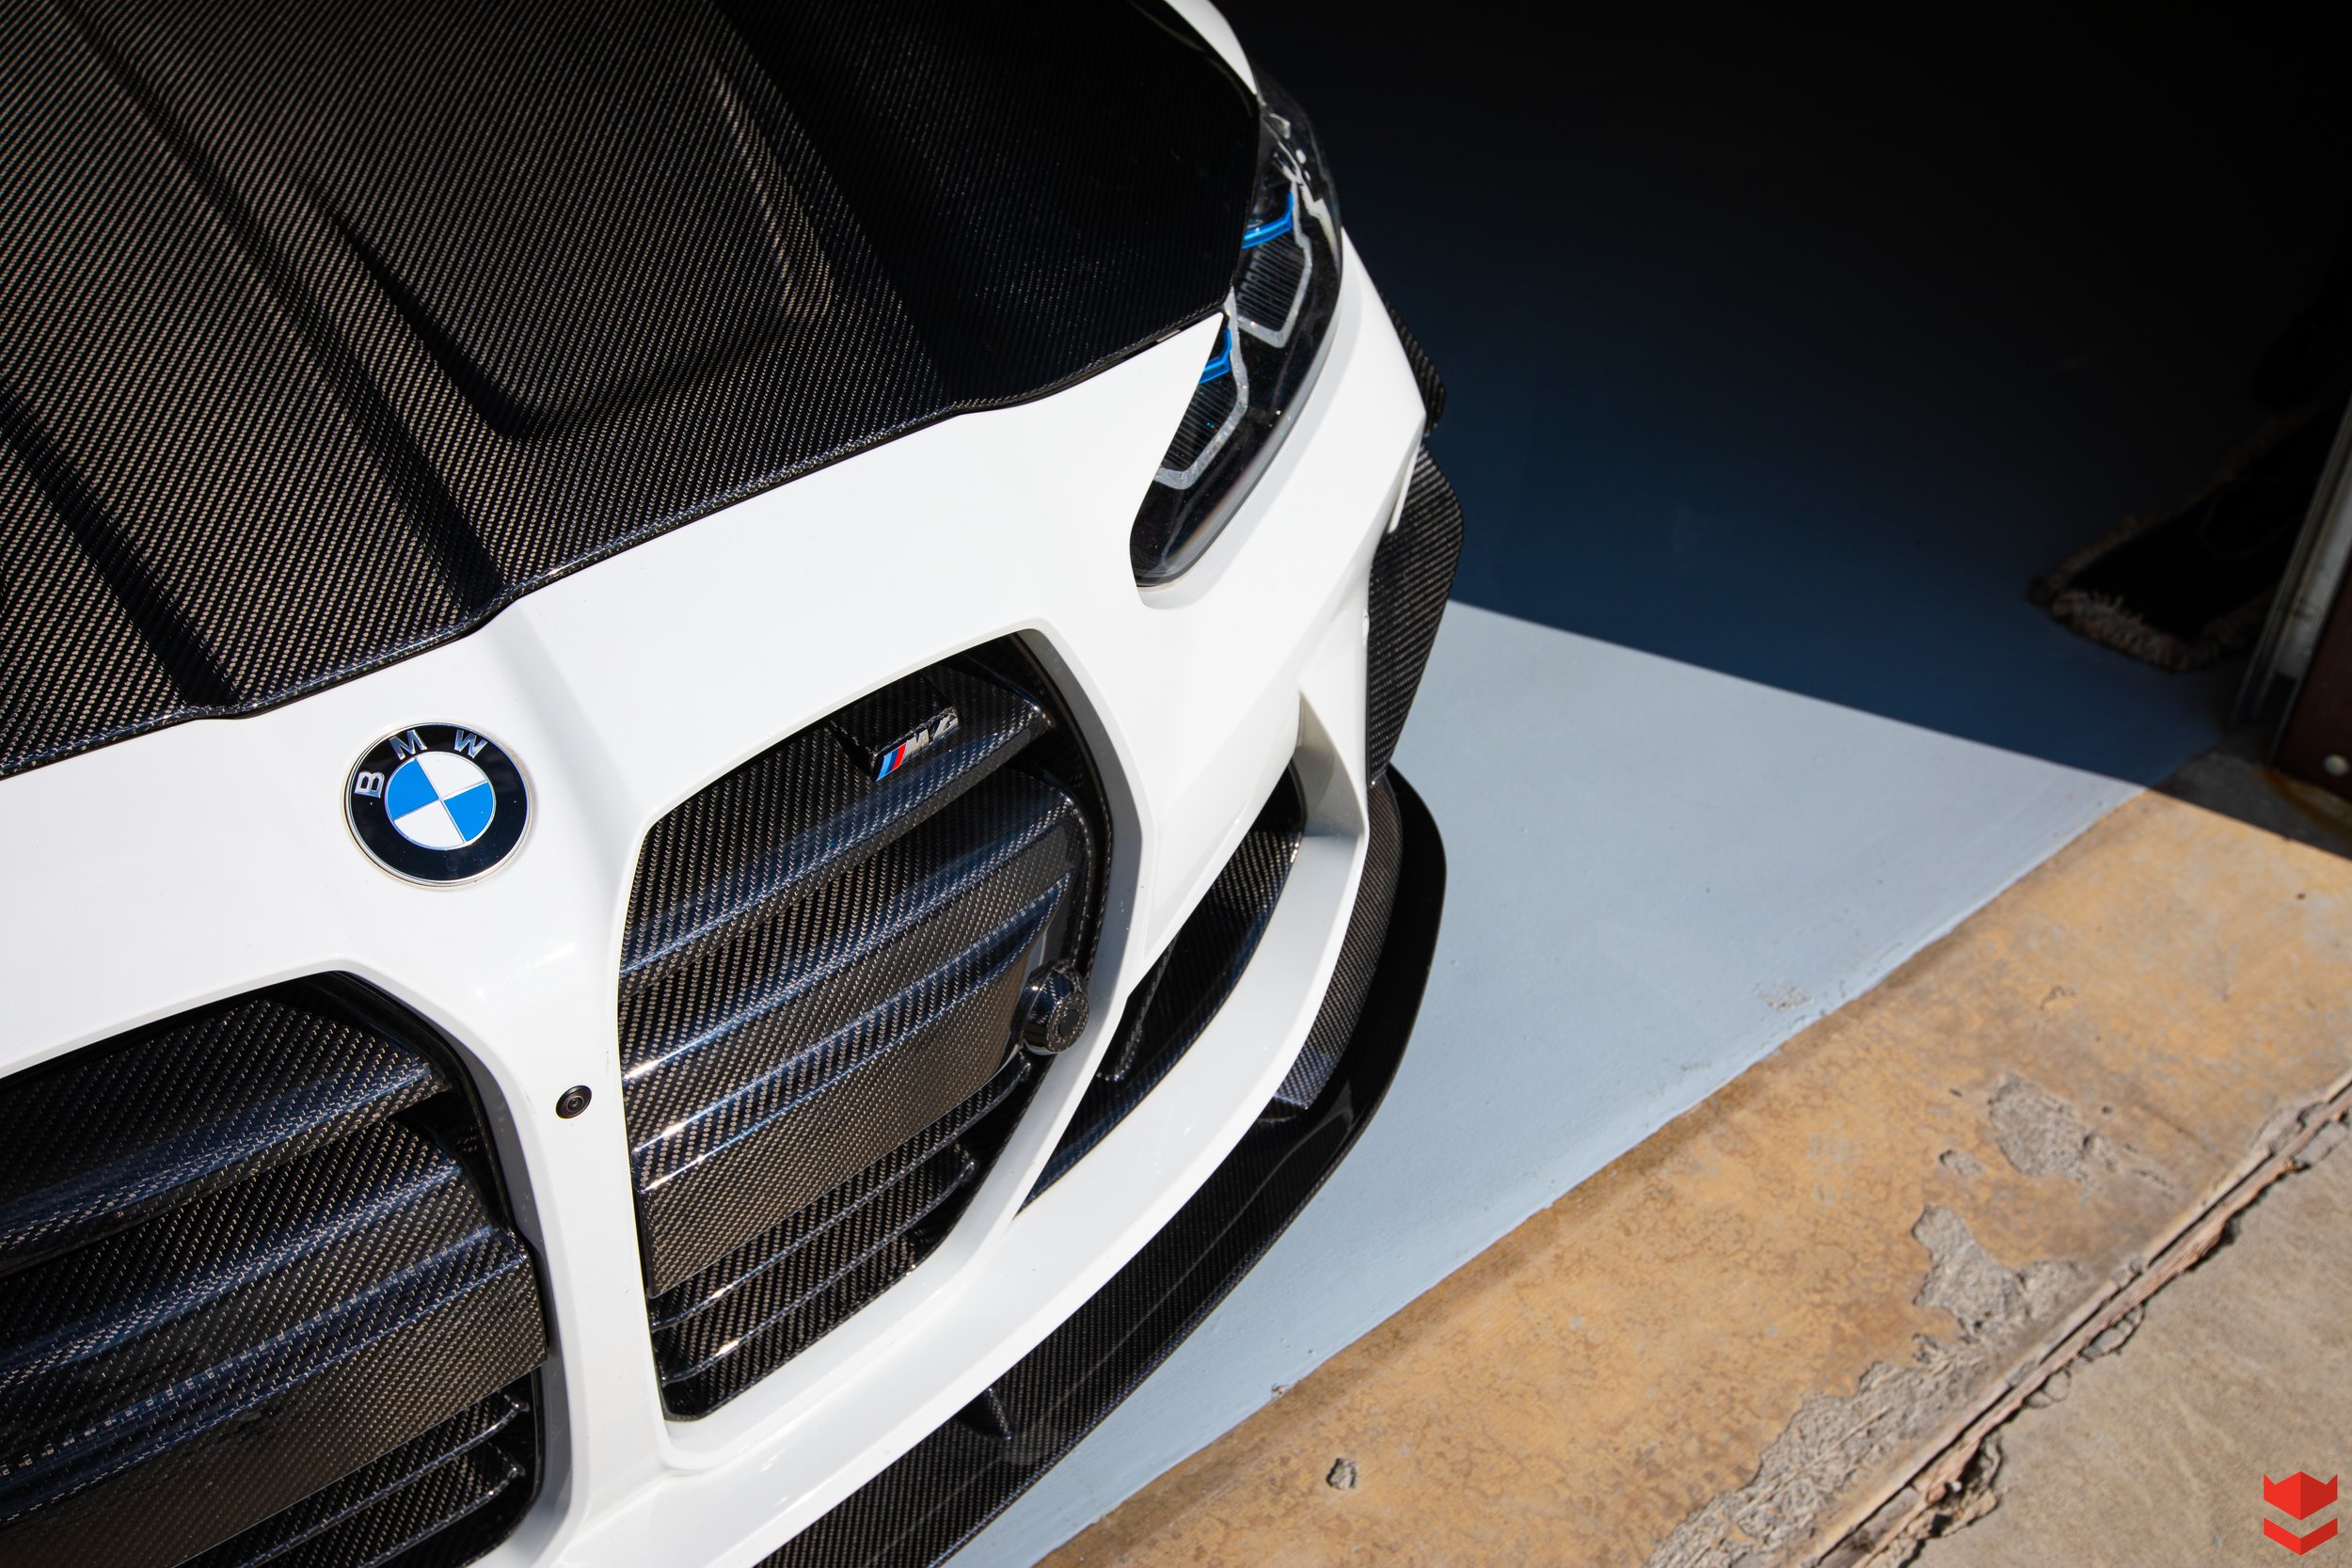 BMW Aftermarket Accessories and Carbon Parts